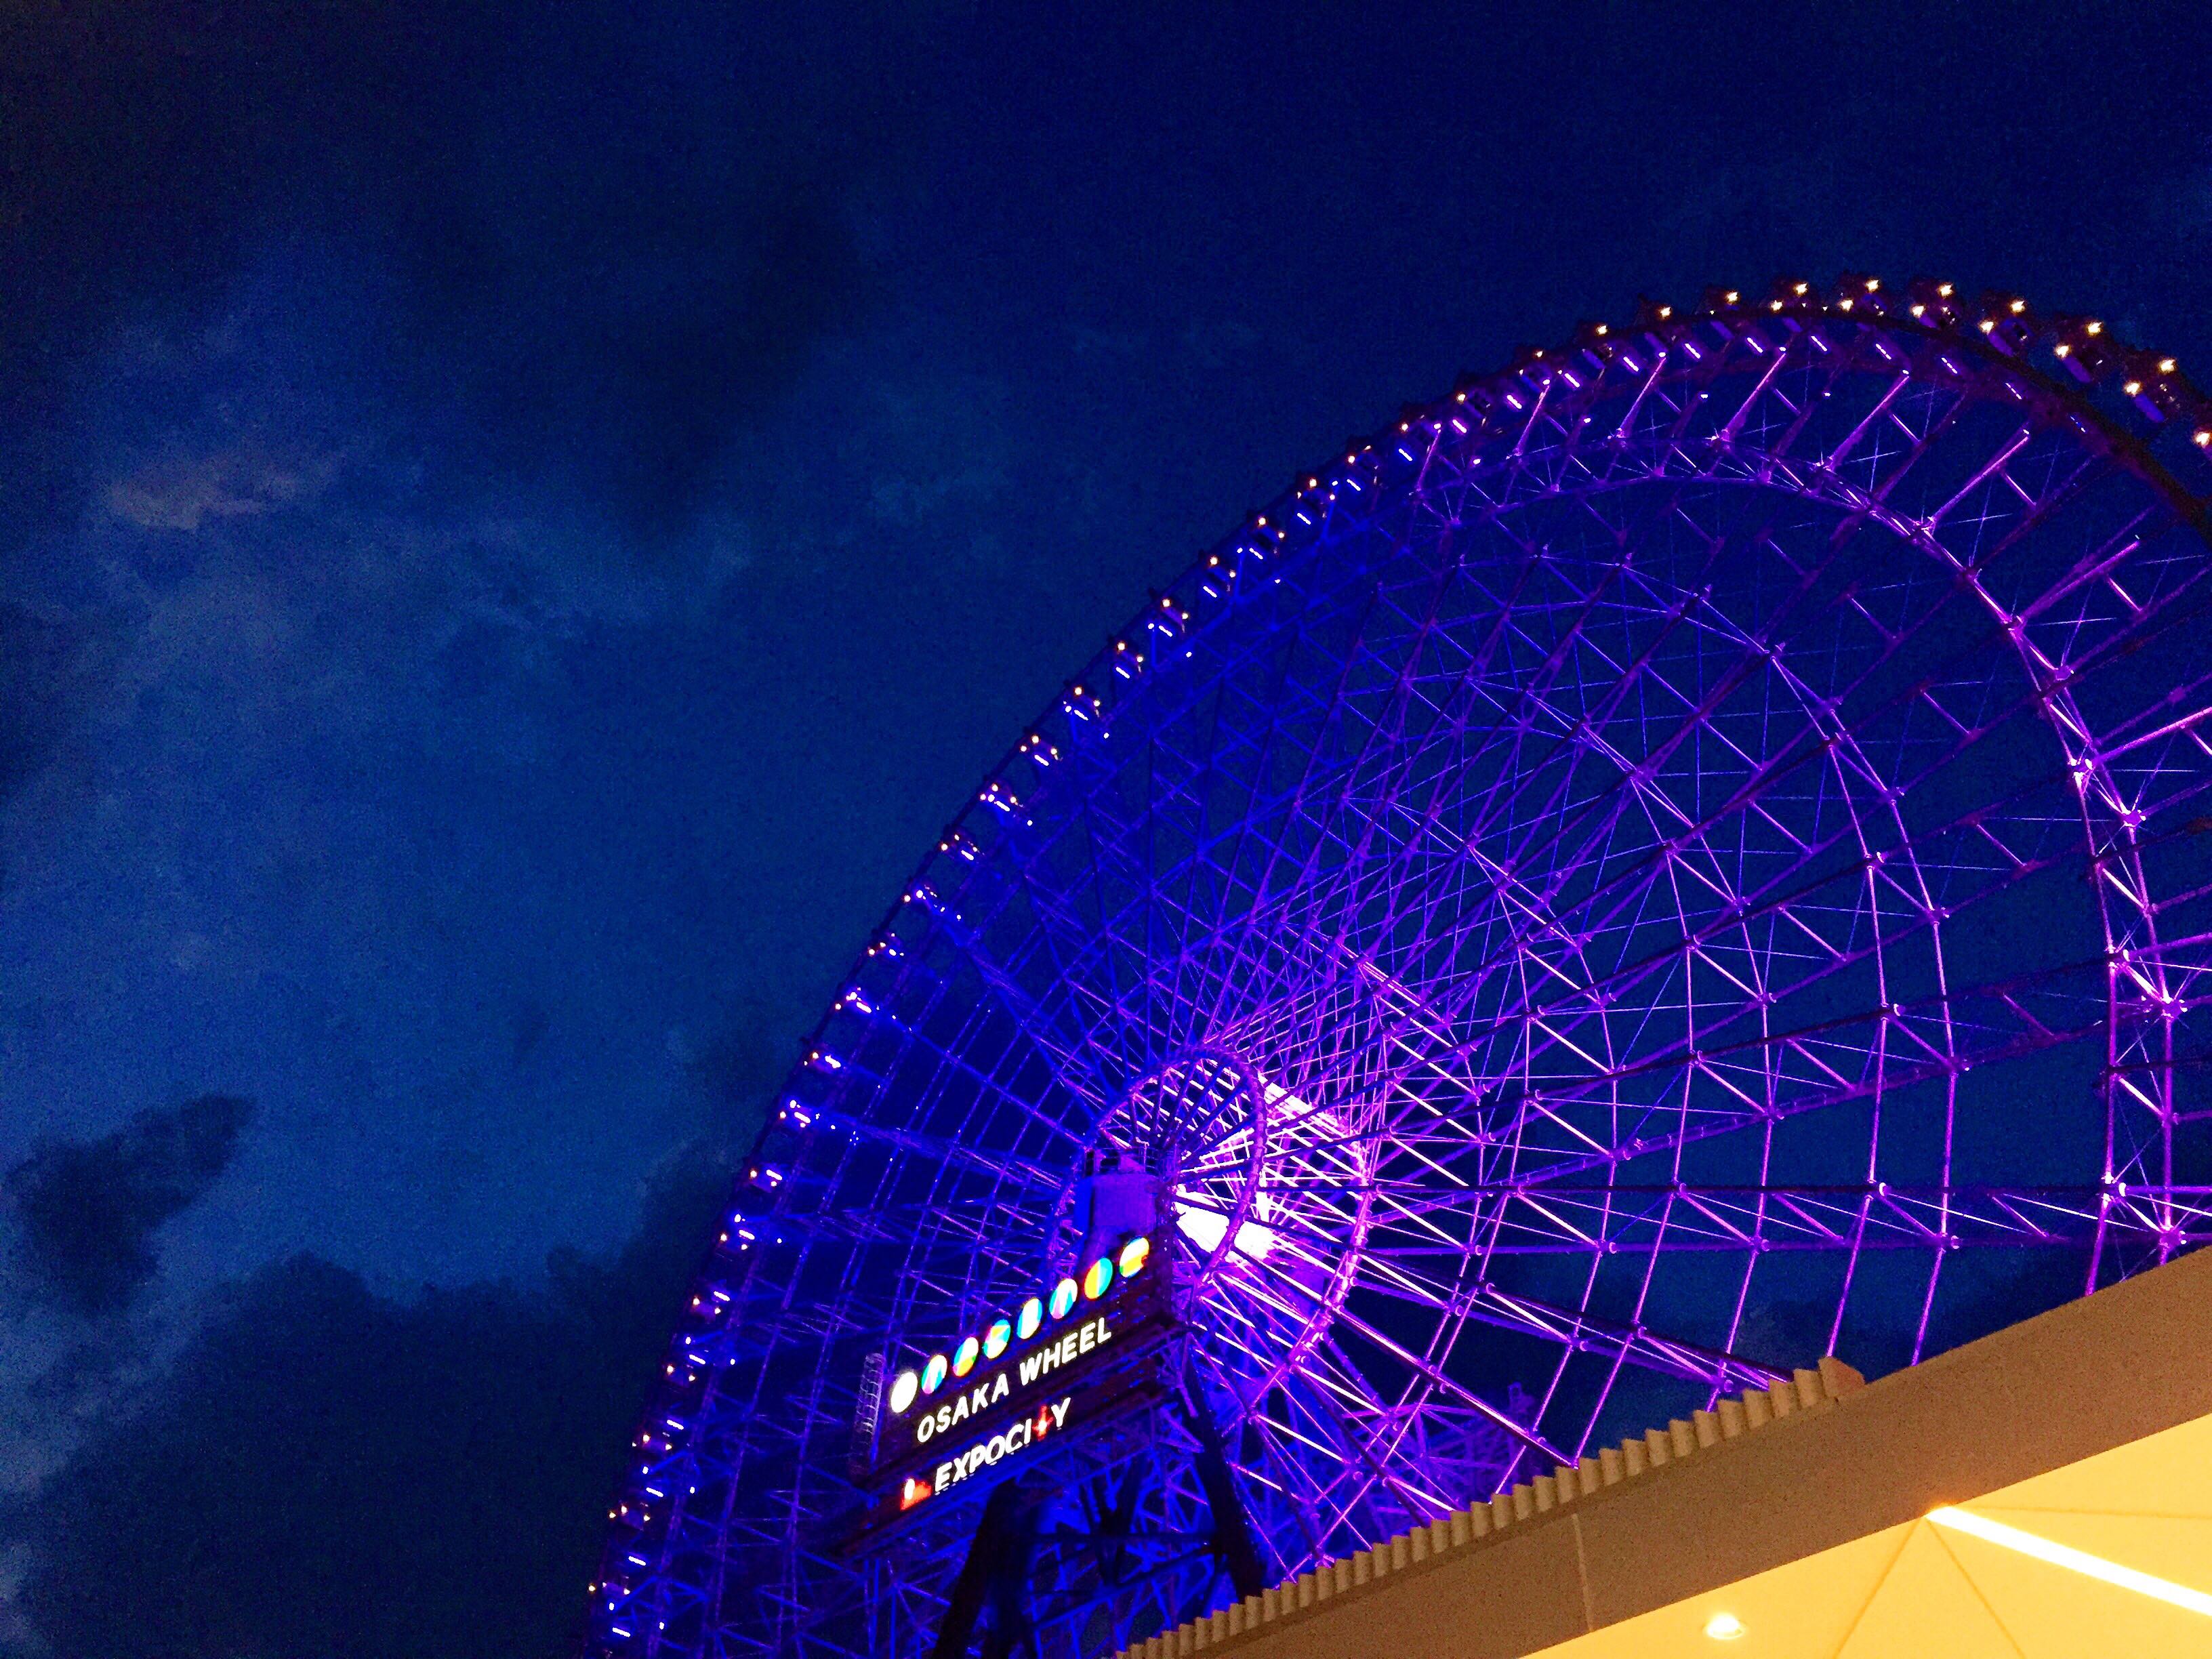 5 Things to Expect from a Trip to Expo City Osaka